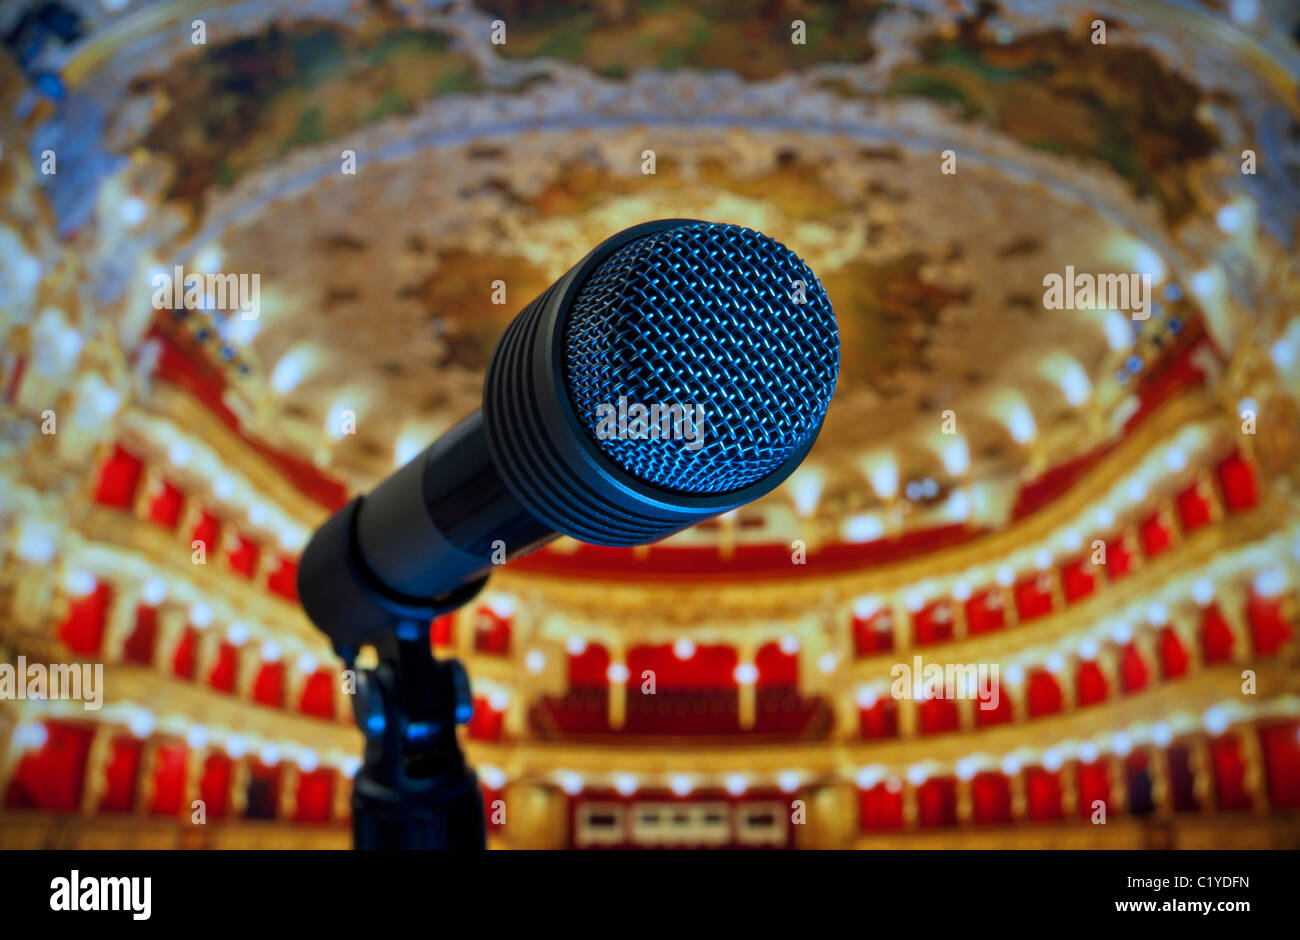 Microphone close-up in Theatre Auditorium Performance Stage is set, interior in background concepts Performance Stage Fright Rehearsal Recording Sound Stock Photo